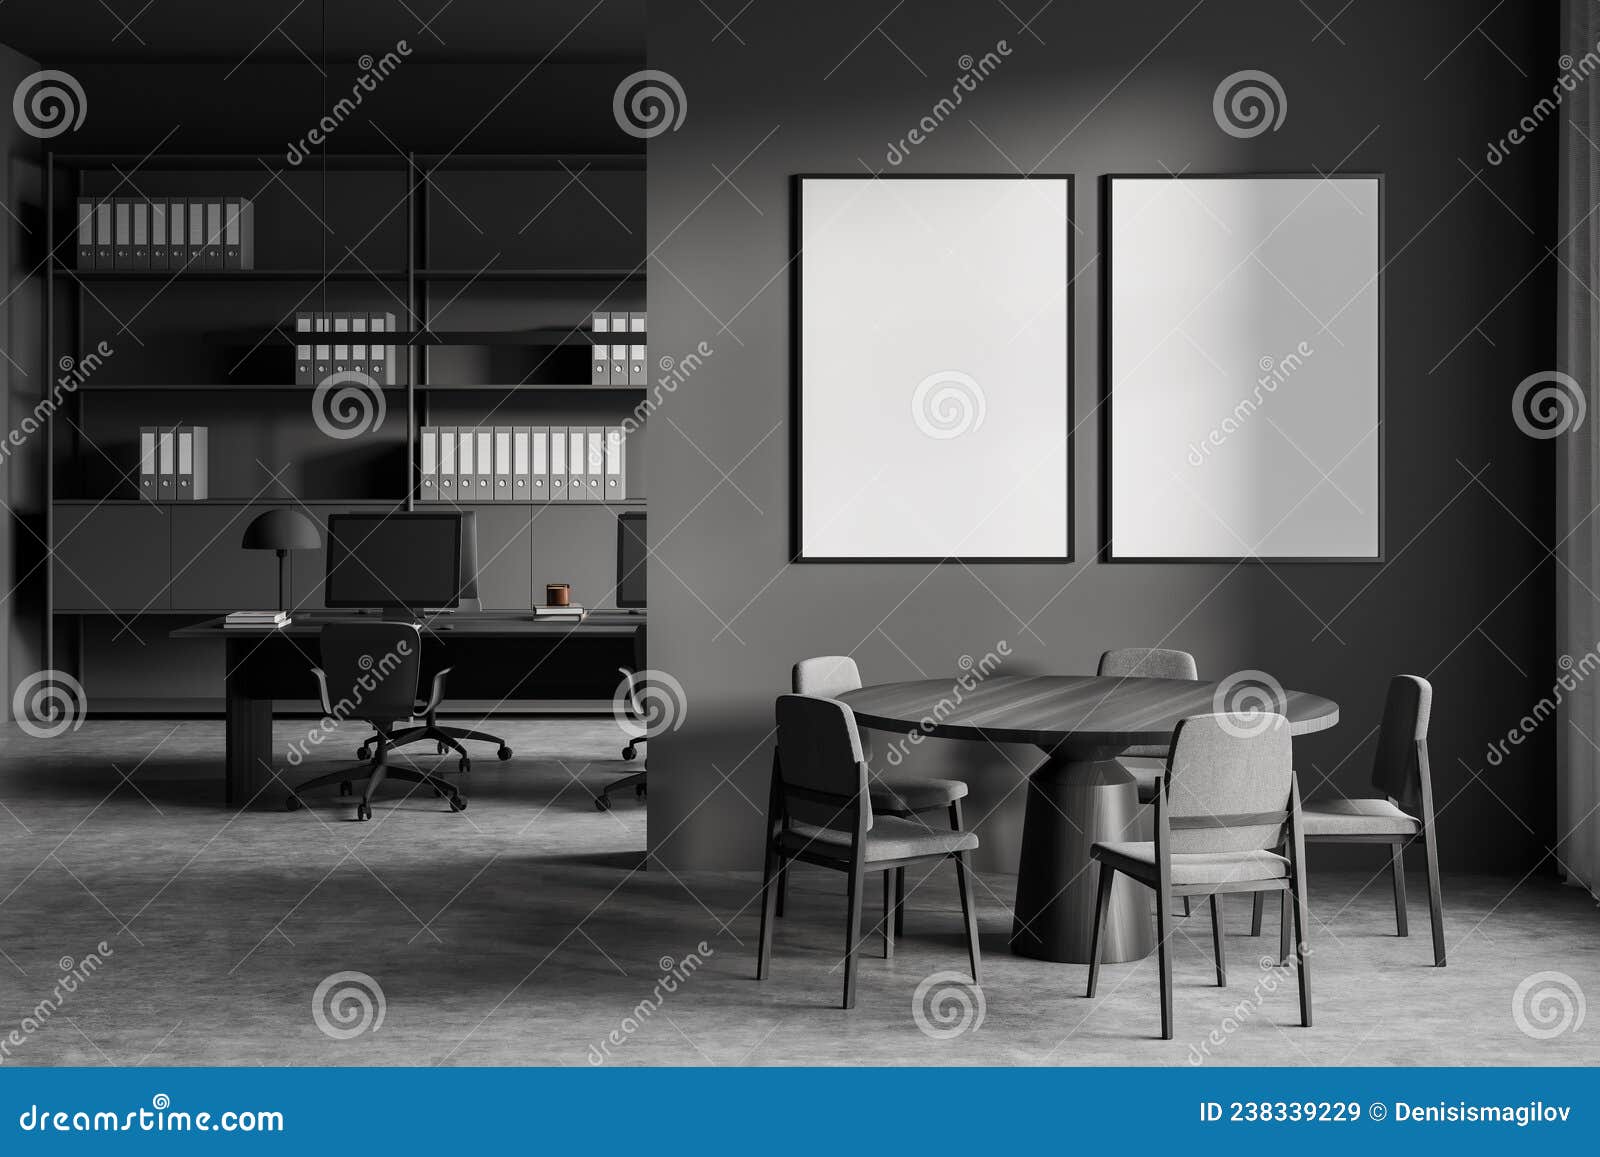 Dark Office Room Interior with Two Empty White Posters Stock ...